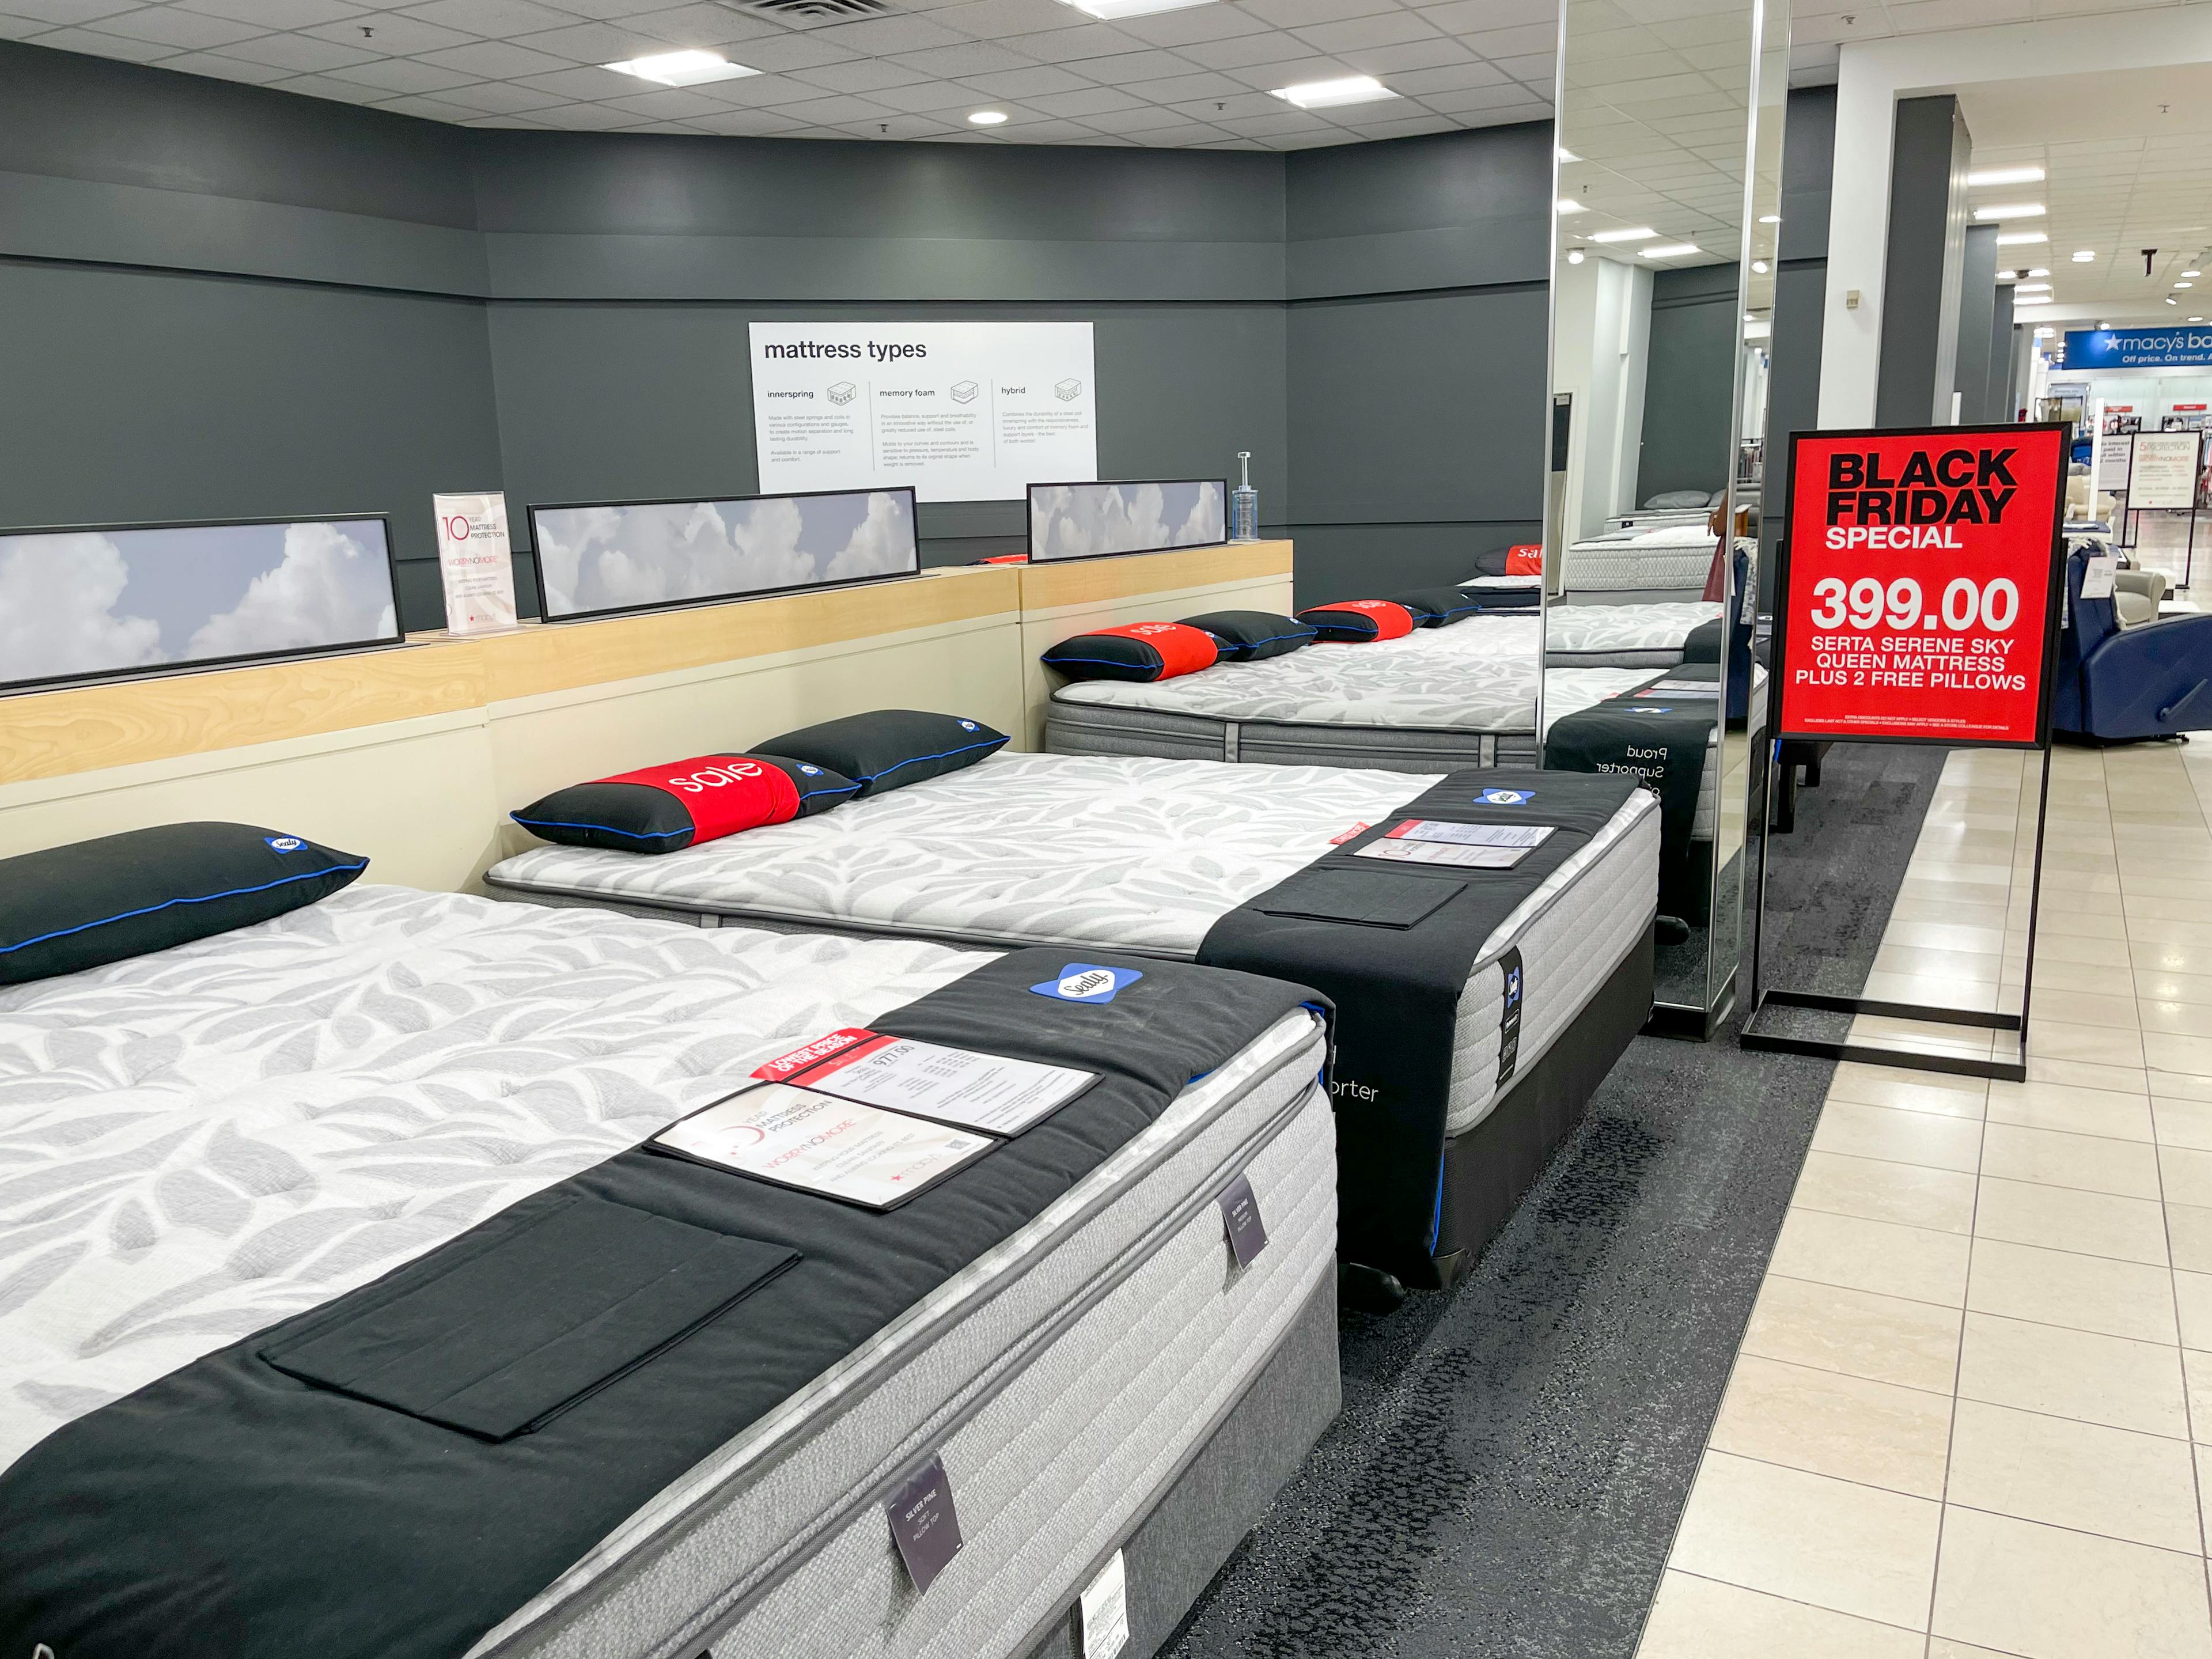 Mattresses on display in a Macy's store.